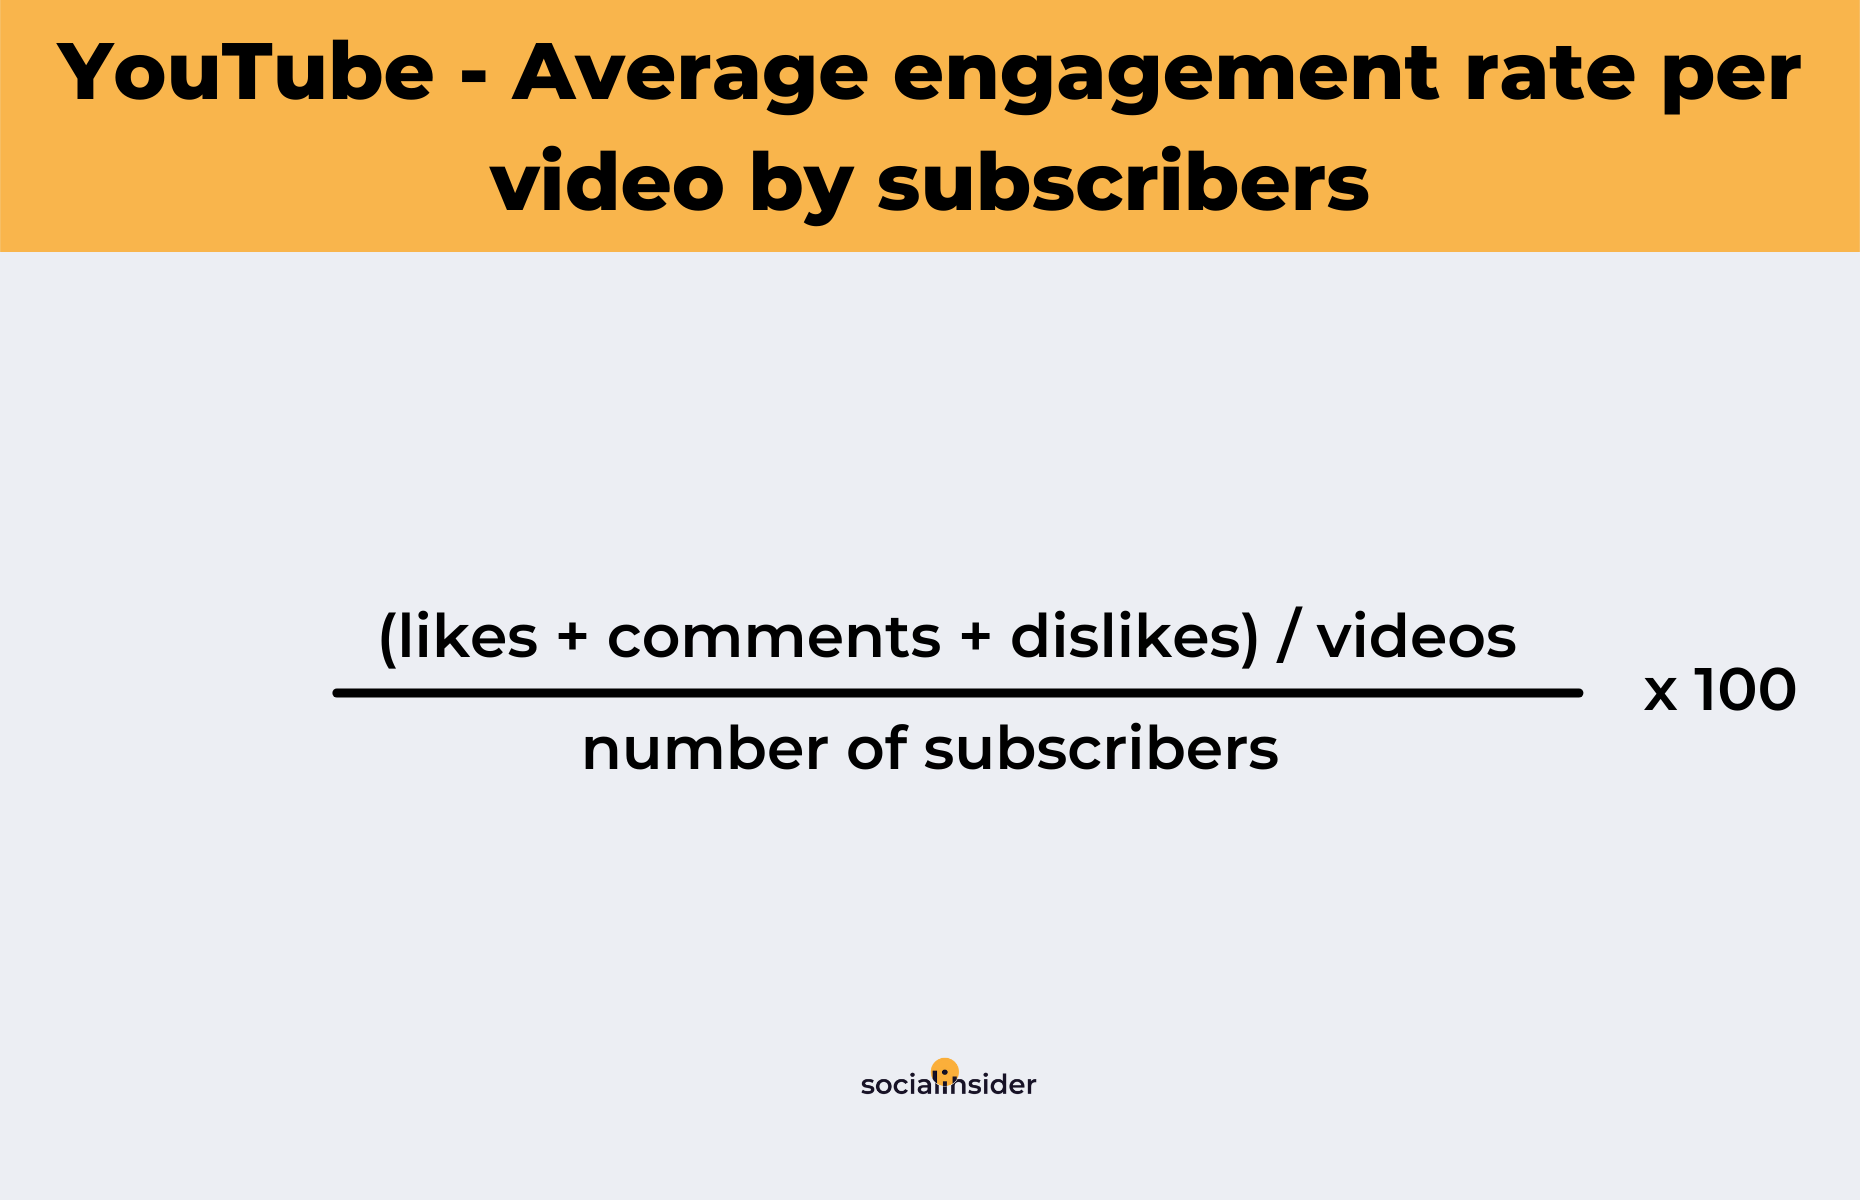 How to calculate the average engagement rate on YouTube